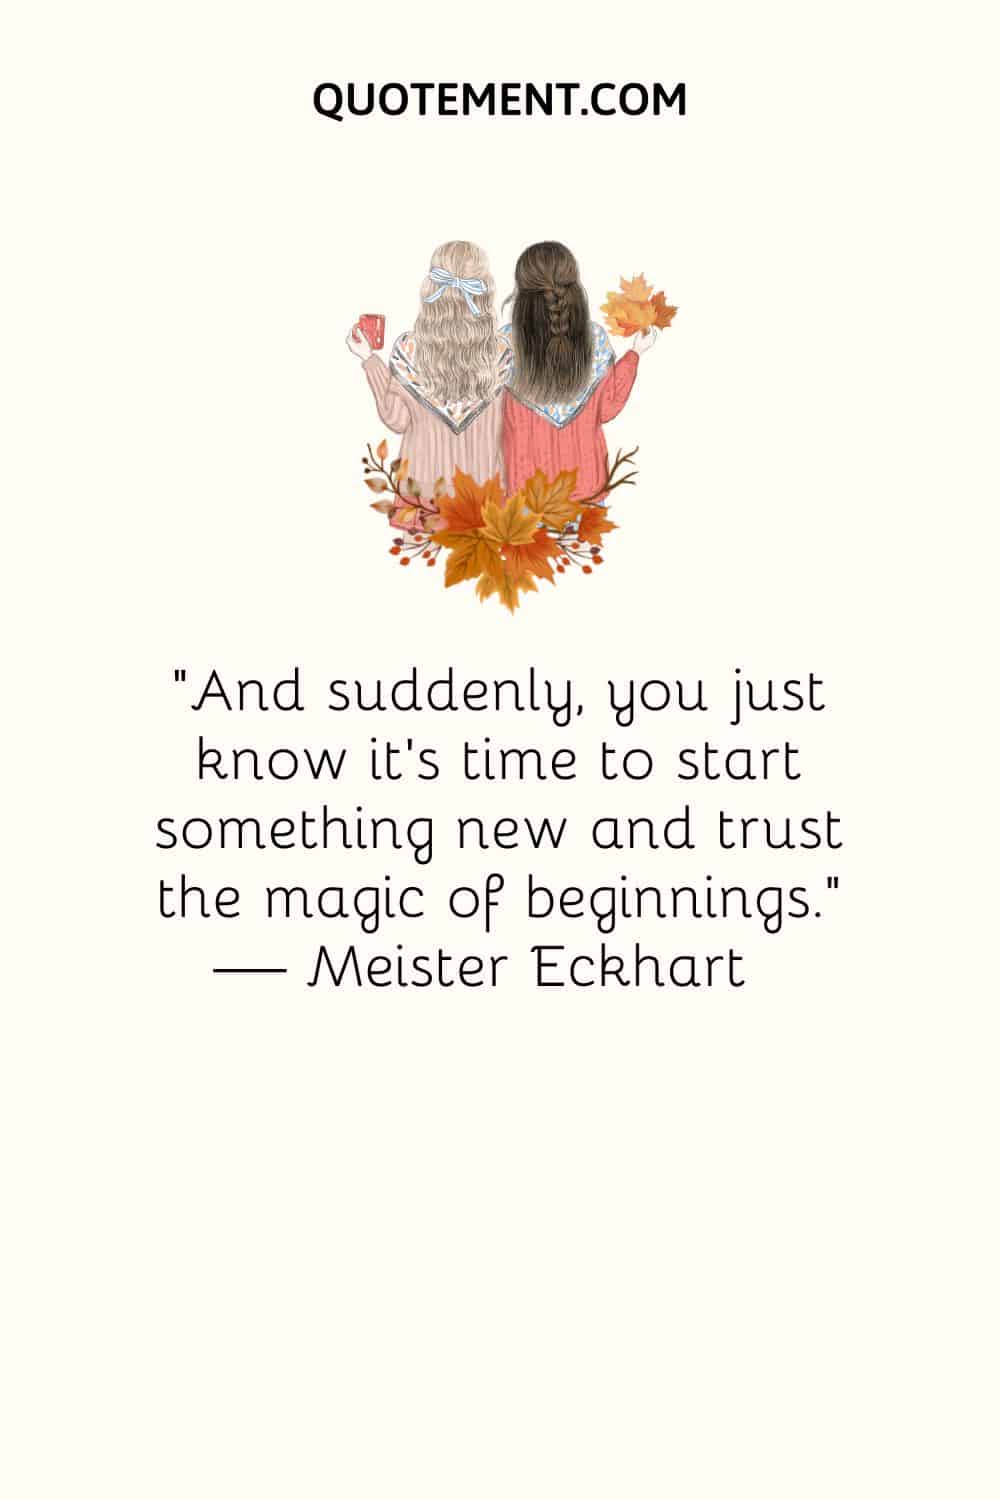 “And suddenly, you just know it’s time to start something new and trust the magic of beginnings.” — Meister Eckhart